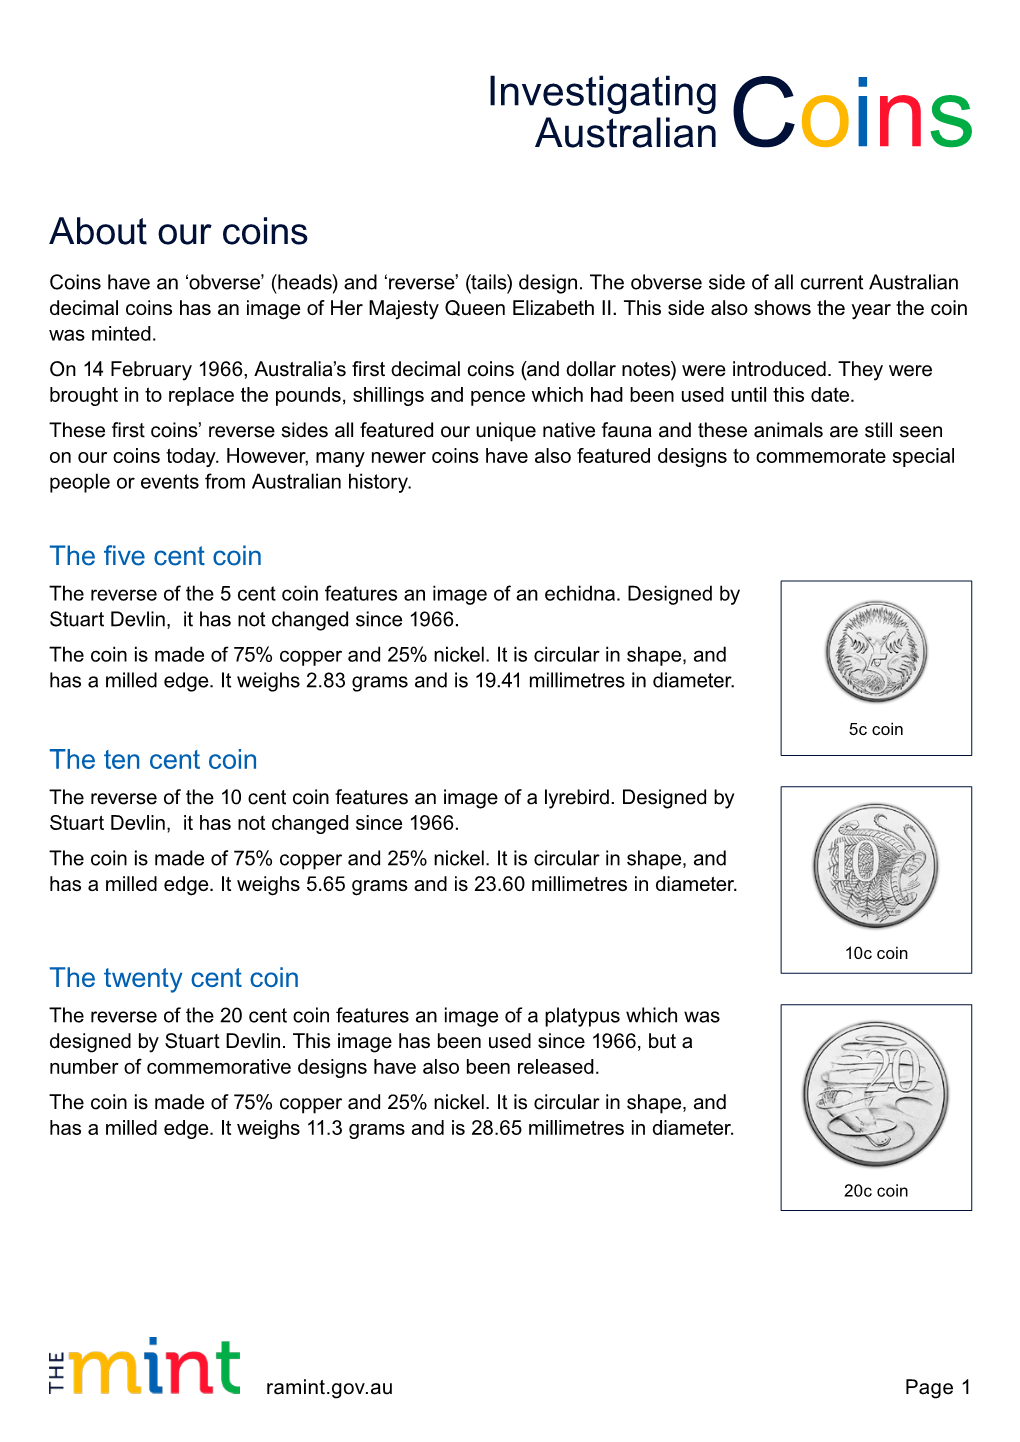 About Our Coins Coins Have an ‘Obverse’ (Heads) and ‘Reverse’ (Tails) Design